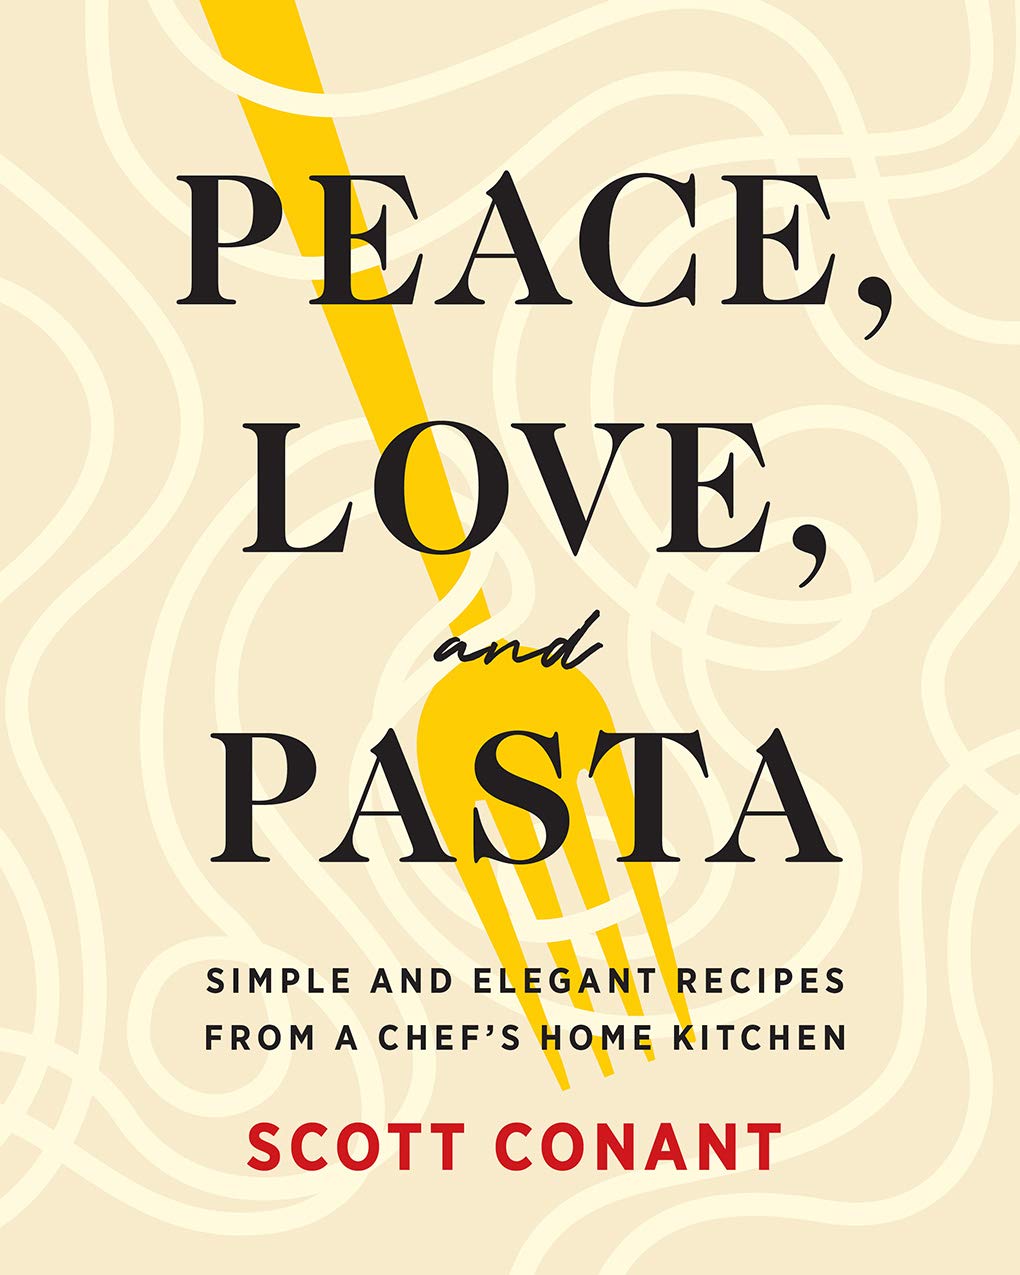 Peace, Love, and Pasta: Simple and Elegant Recipes from a Chef's Home Kitchen (Scott Conant)